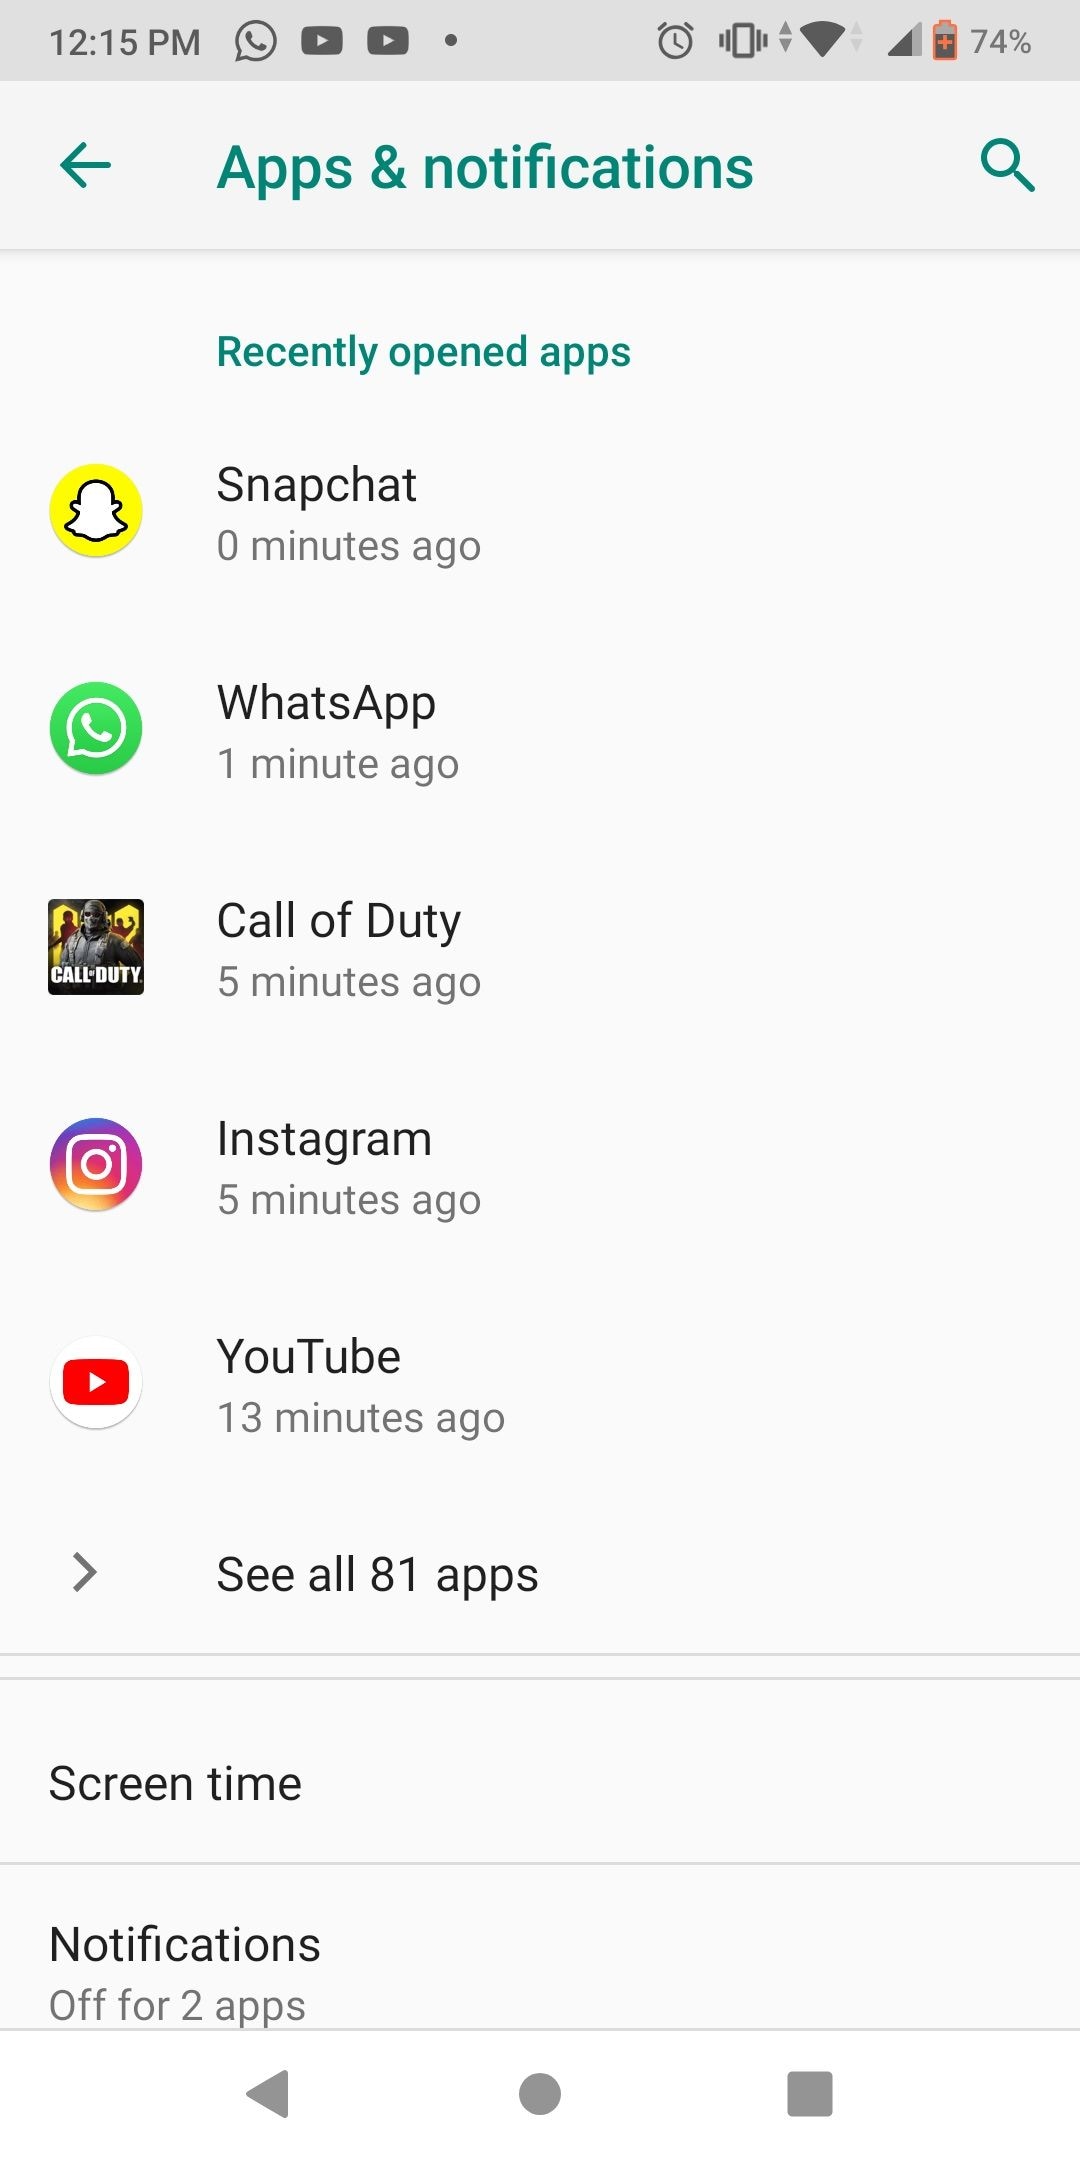 app and notifications